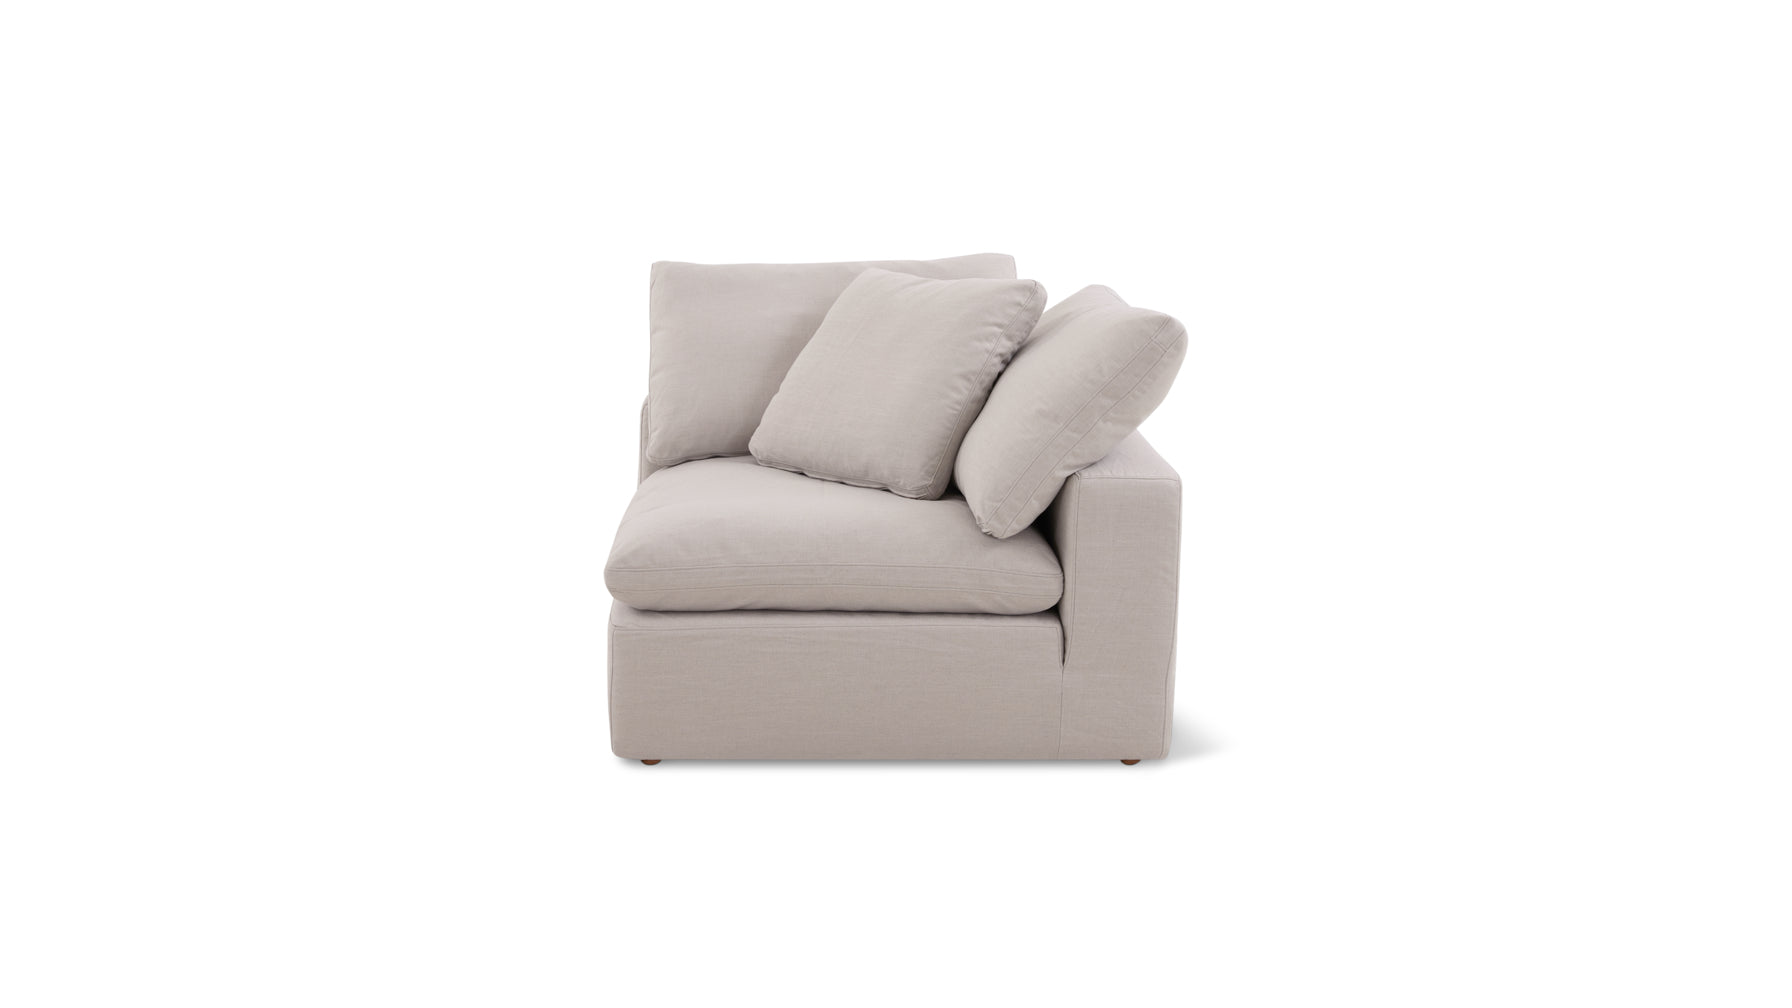 Movie Night™ Corner Chair, Large, Clay (Left Or Right) - Image 1